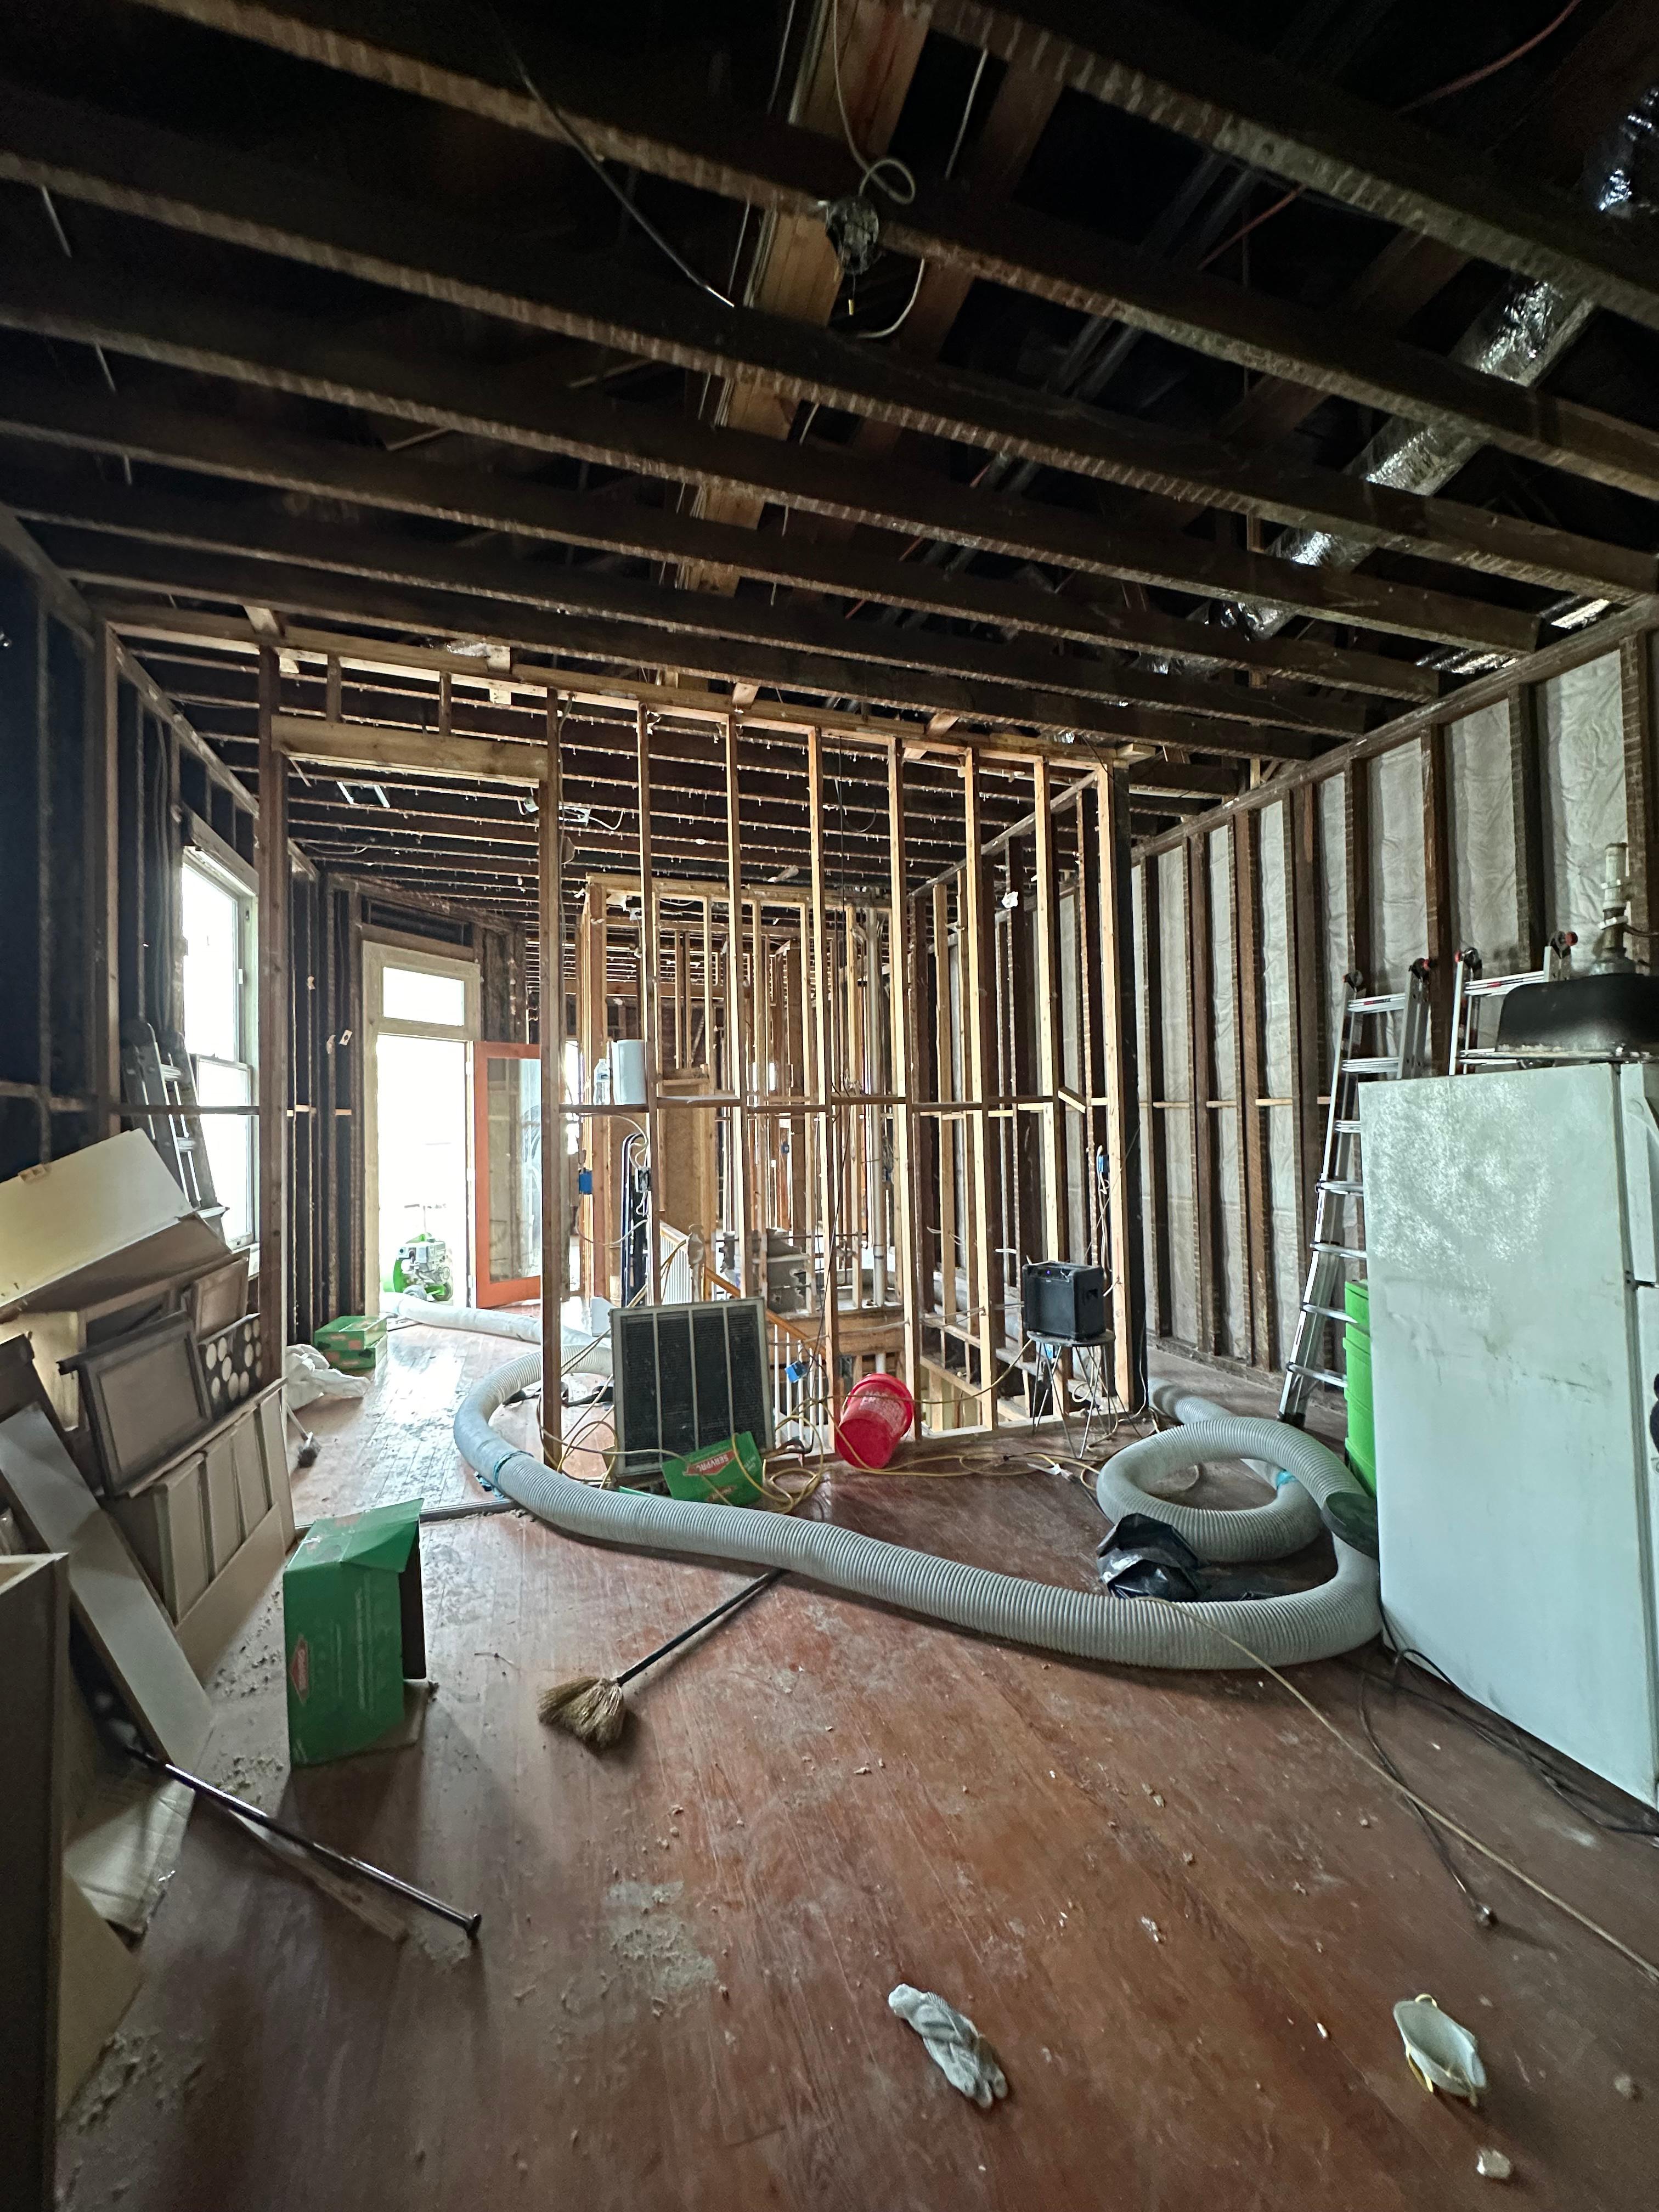 The SERVPRO team had to remove all of the drywall and insulation from this home due to a fire.  Once the damaged area has been removed, the team will start working on removing the odor from the rest of the house.